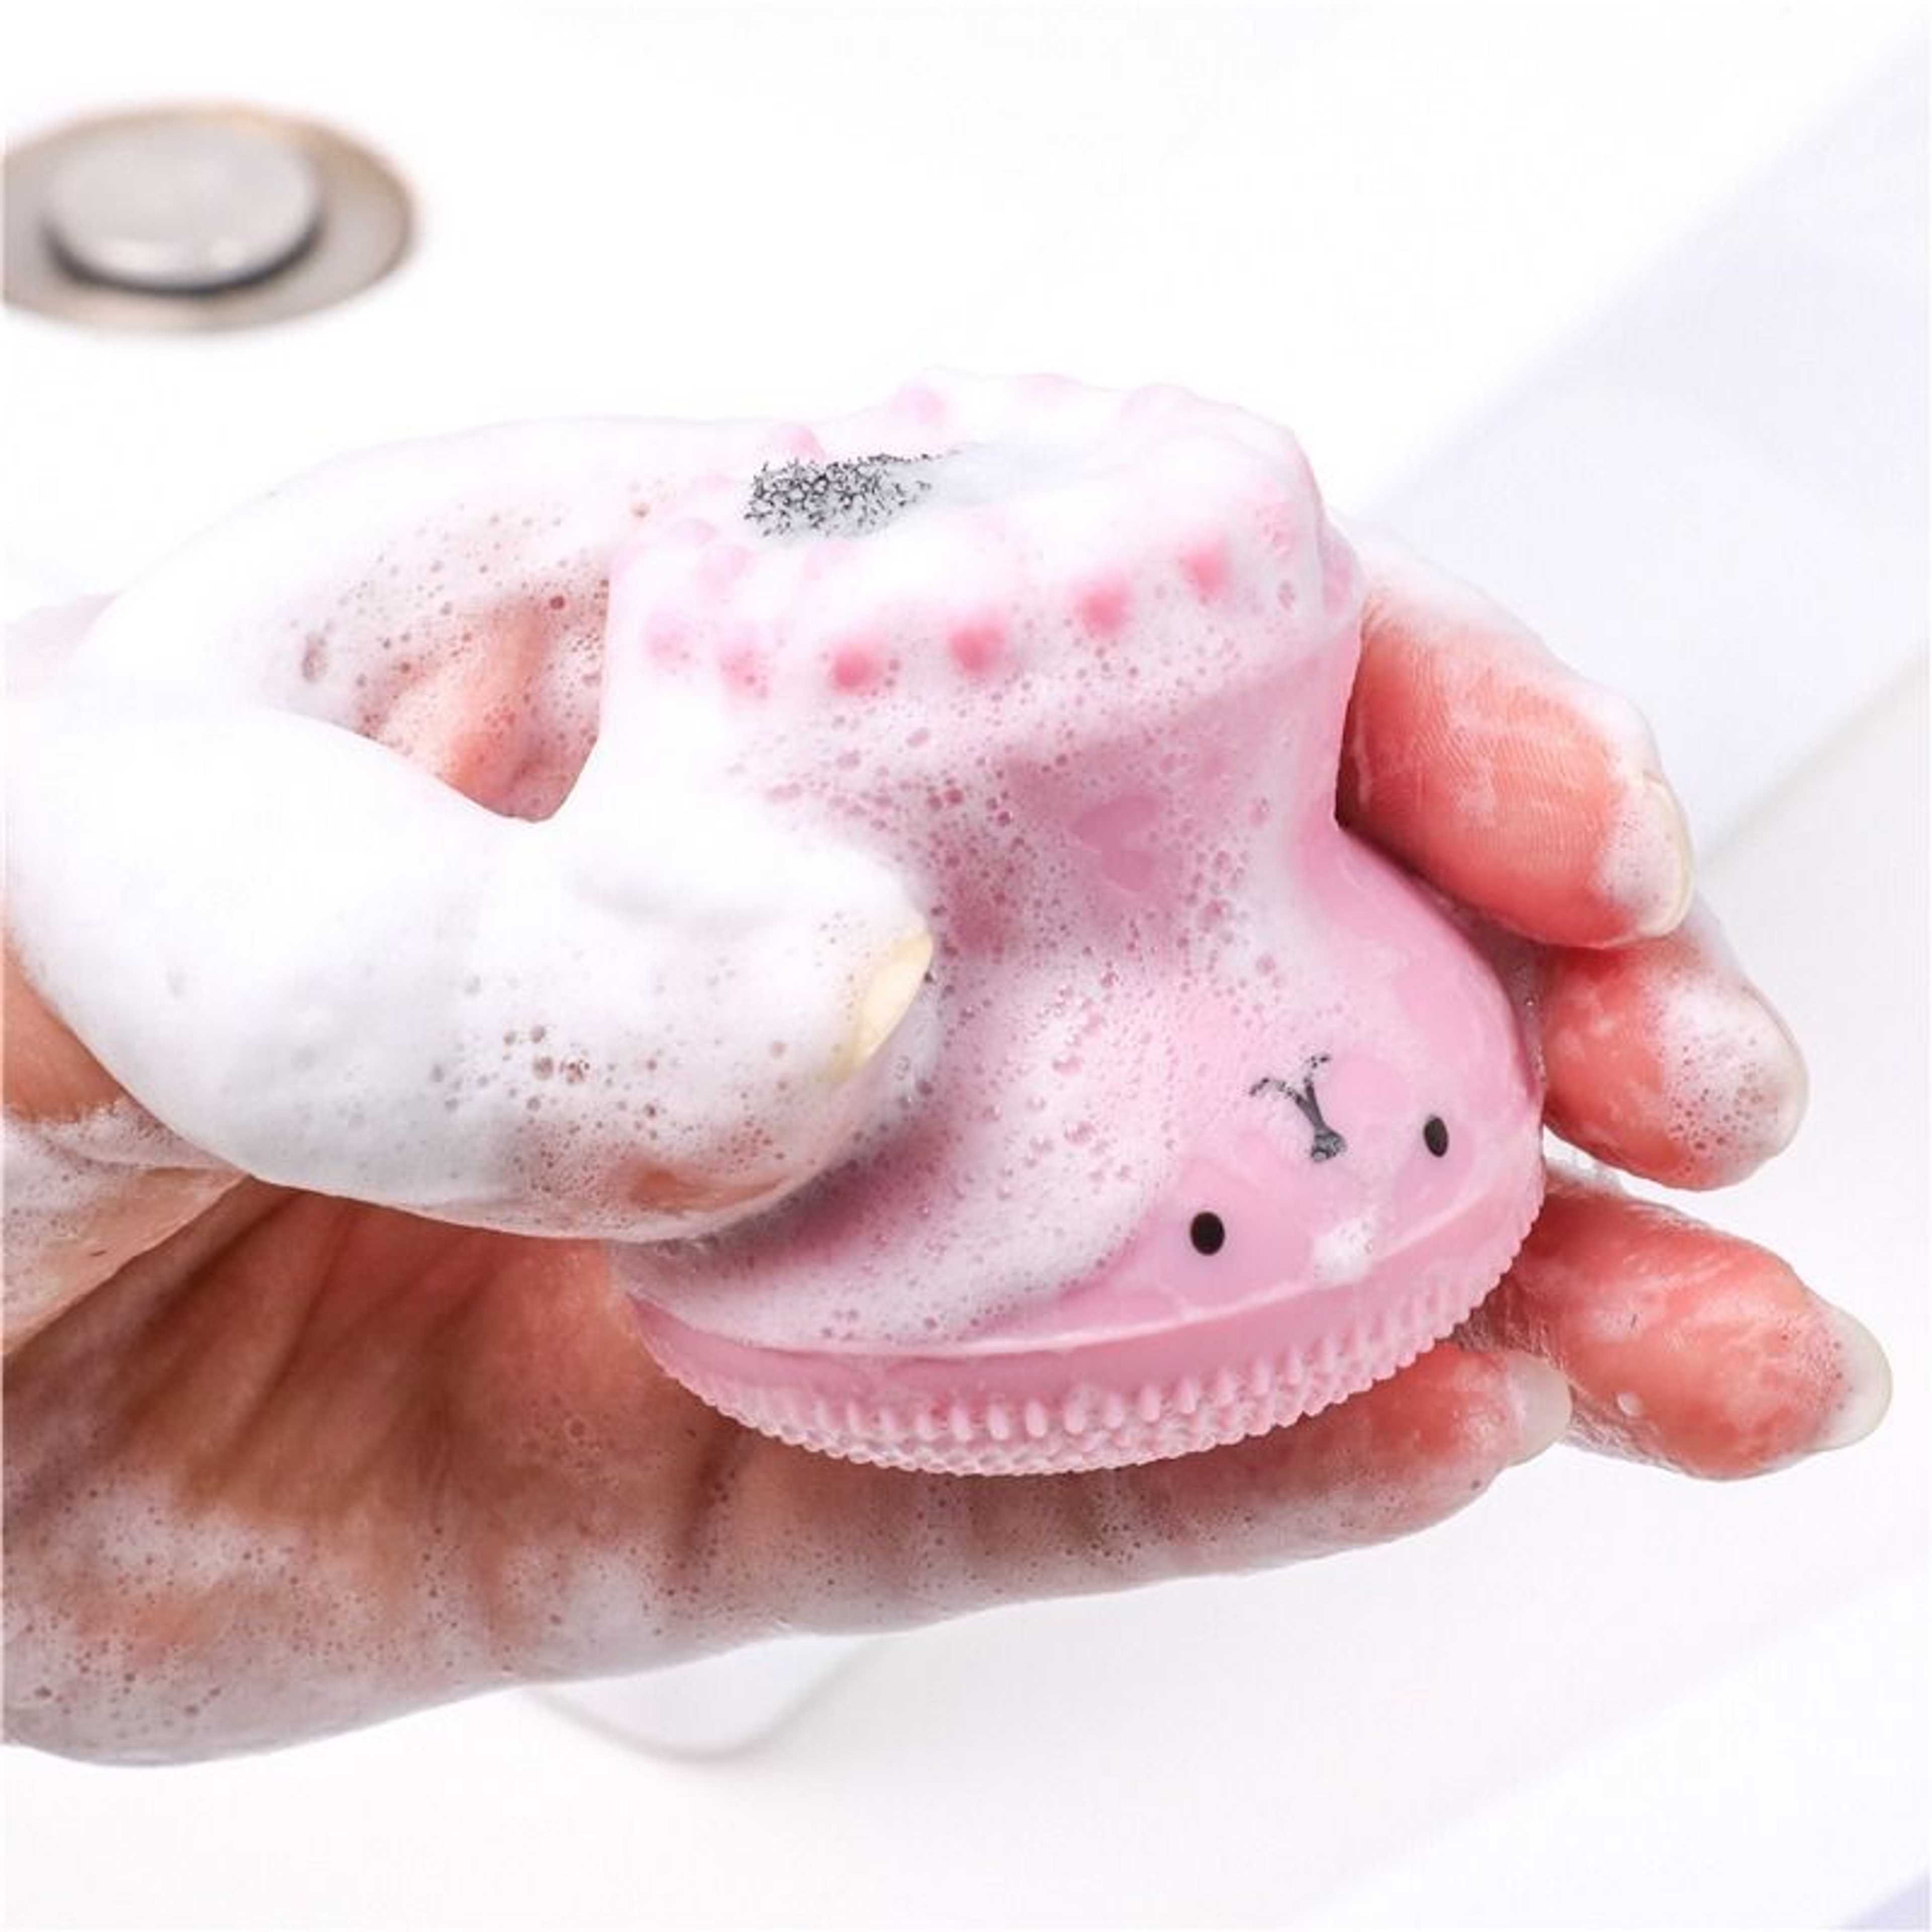 Silicone Face Cleansing Brush Facial Octopus Shape Cleanser Pore Cleaner Exfoliator Face Scrub Washing Brush Skin Care tool